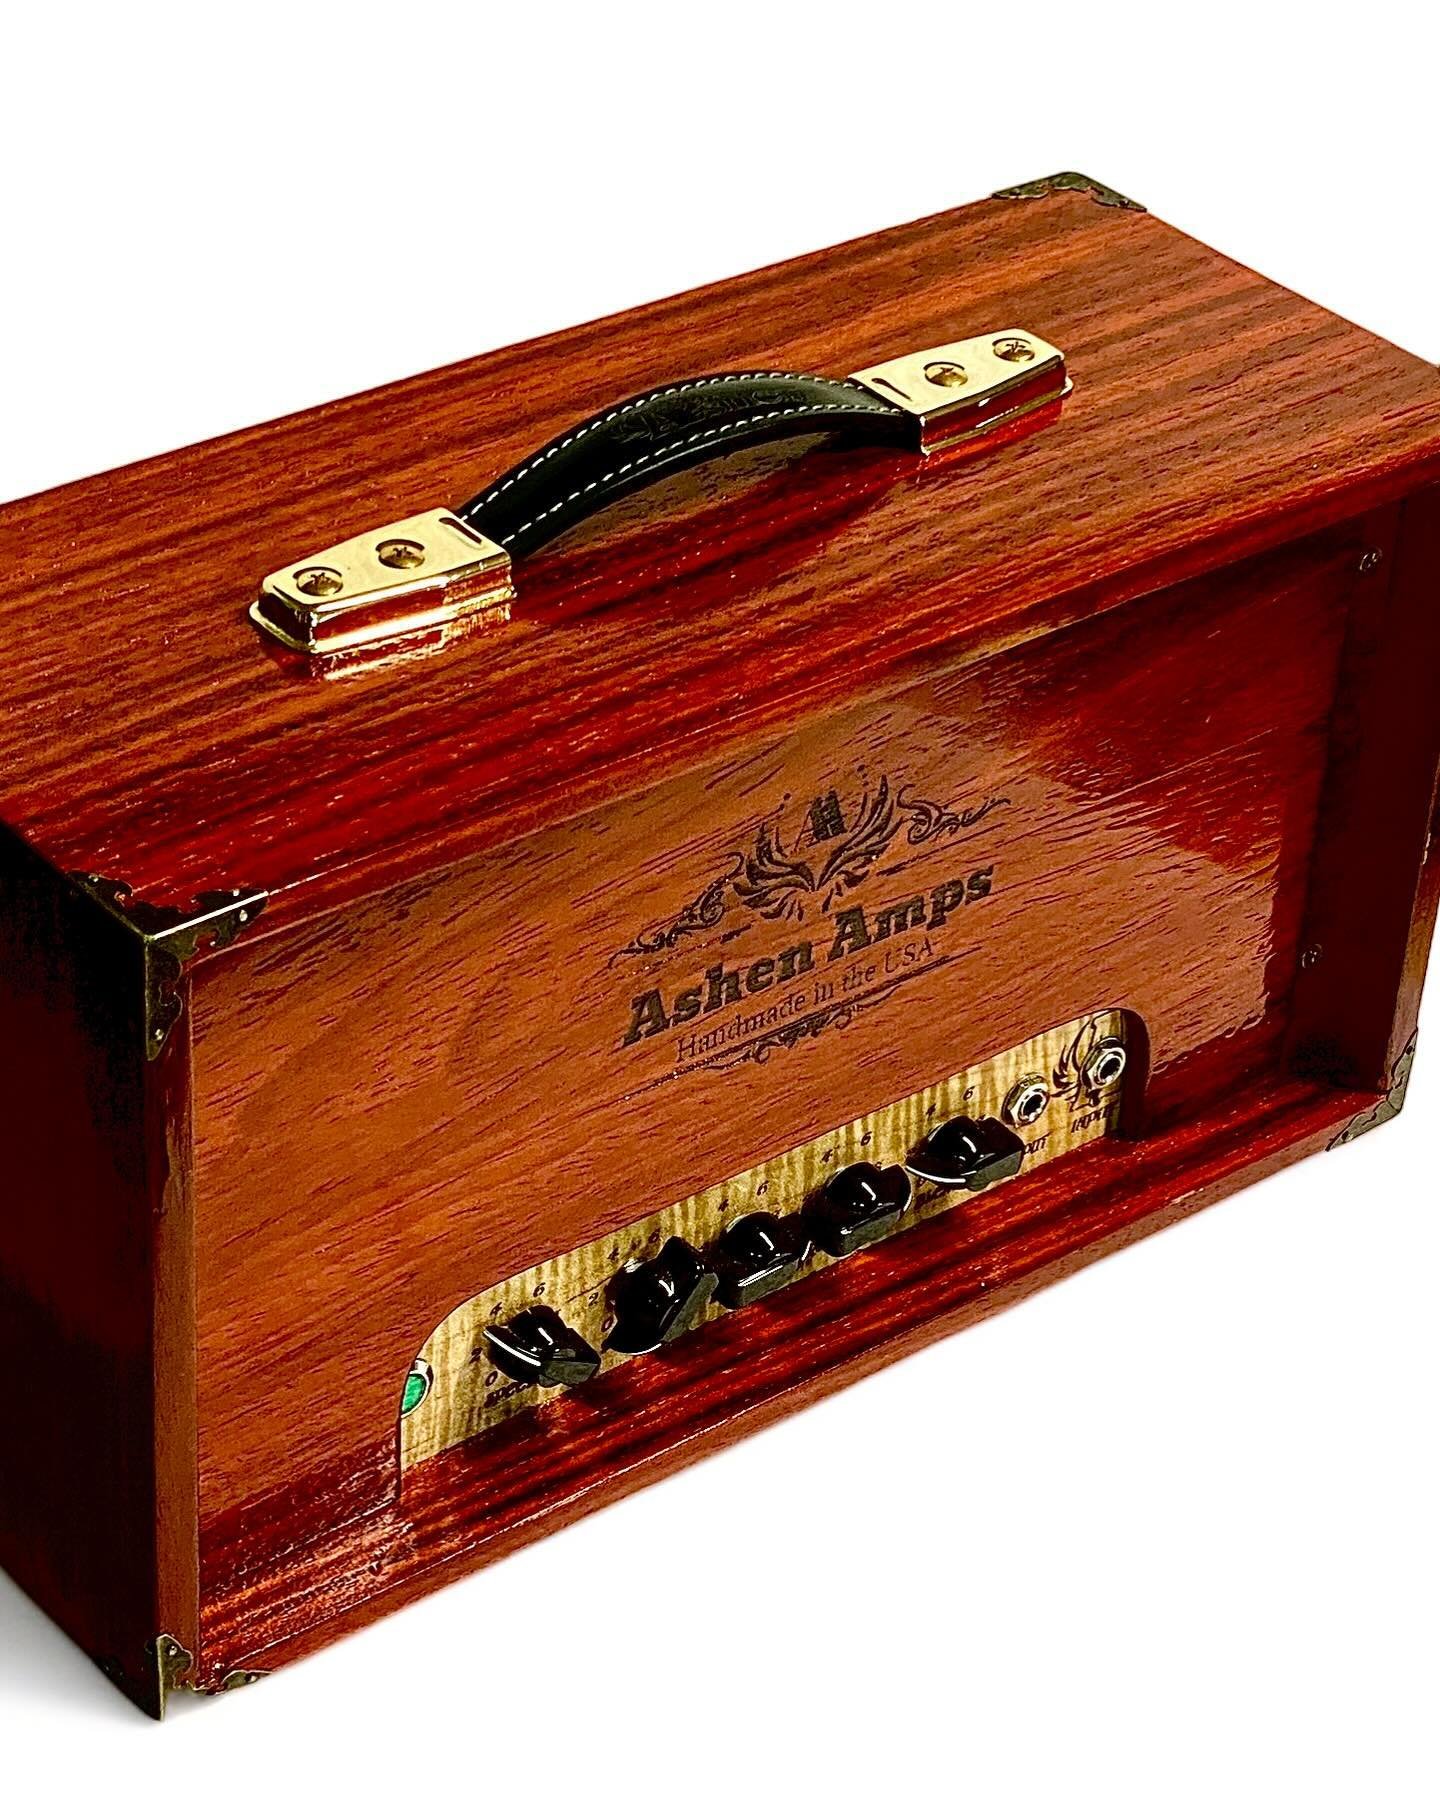 🎛️🔥 Introducing the Ashen ReVibe - a handmade tube Reverb and harmonic tremolo effect unit enclosed in a stunning padauk shell. 🎶✨ Experience the warm and lush tones that only a tube-driven reverb can deliver, combined with the mesmerizing pulsati